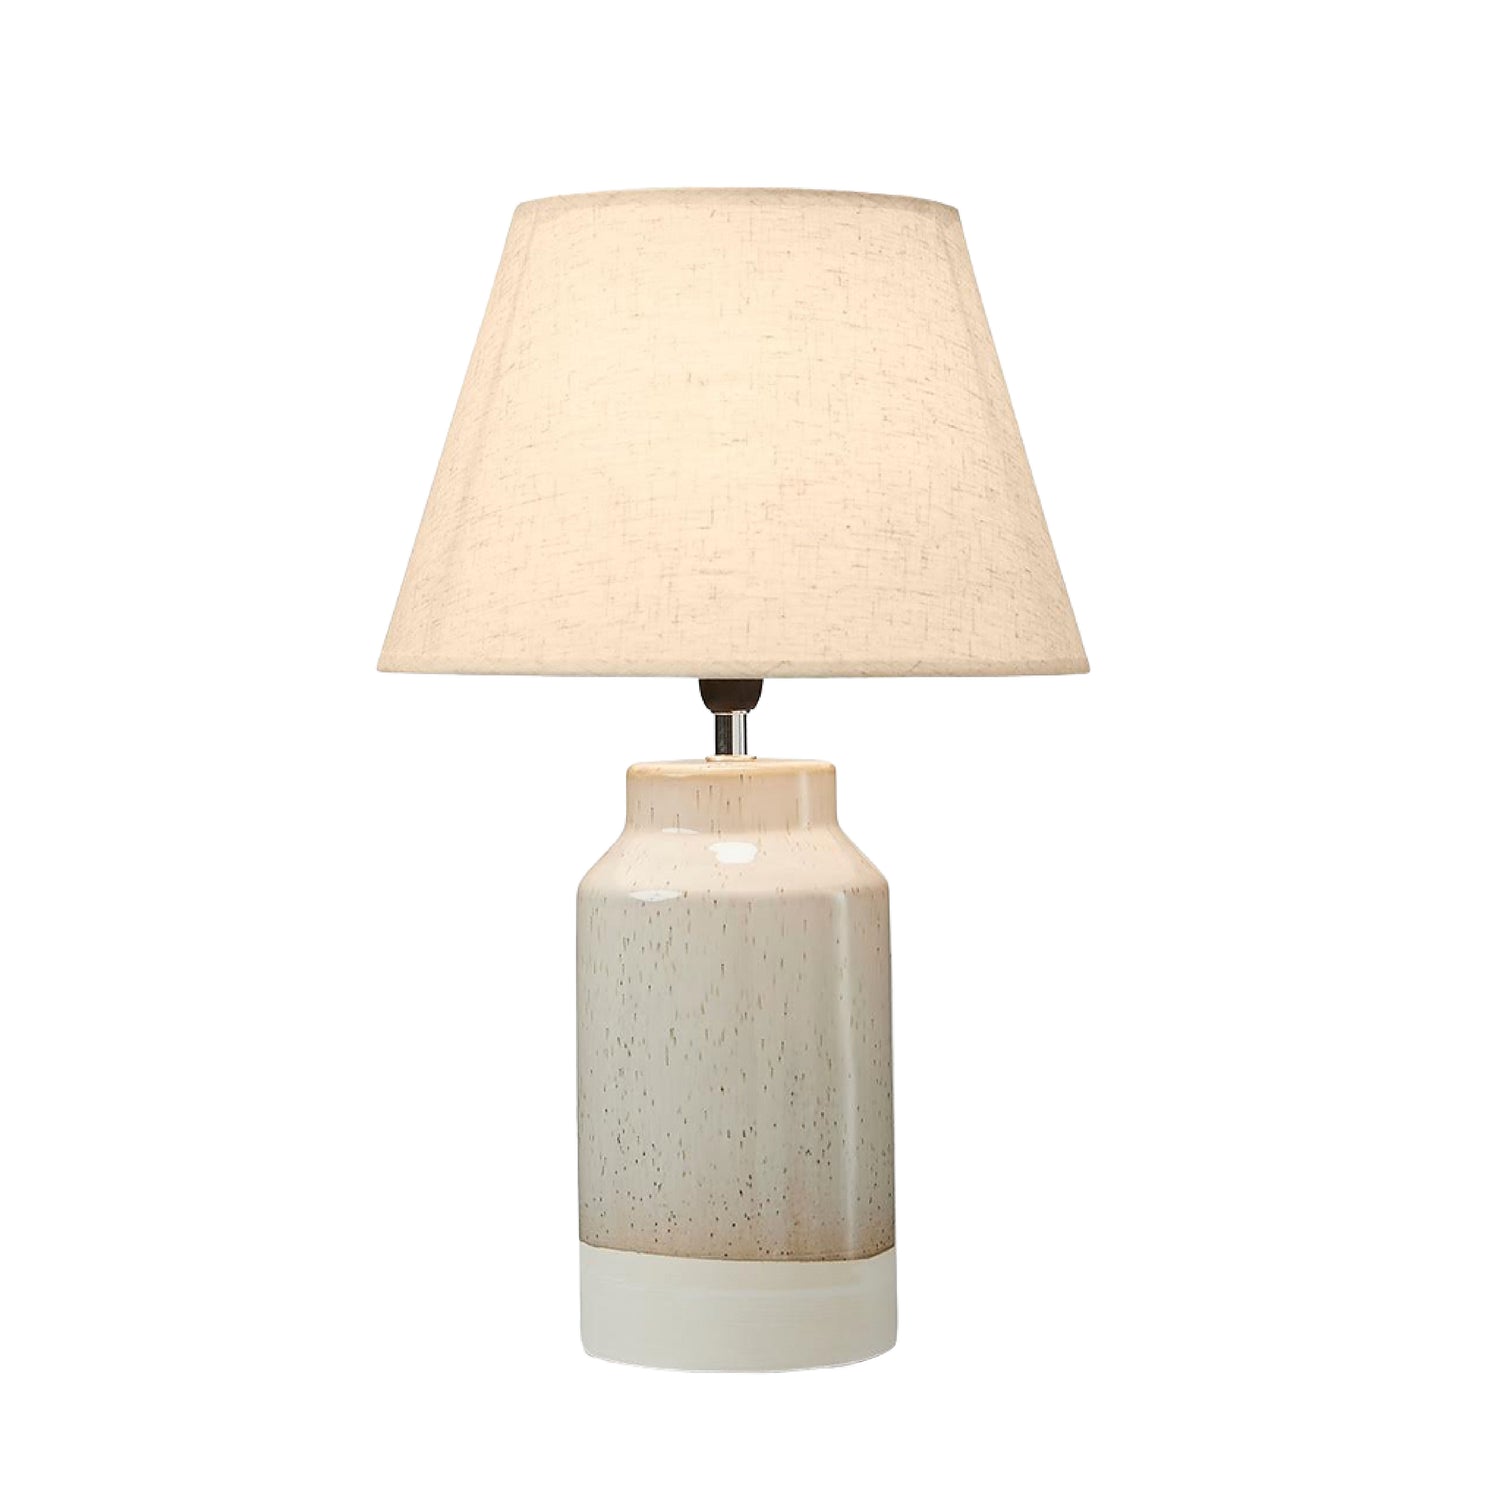 Porcelain Table Lamp With Shade